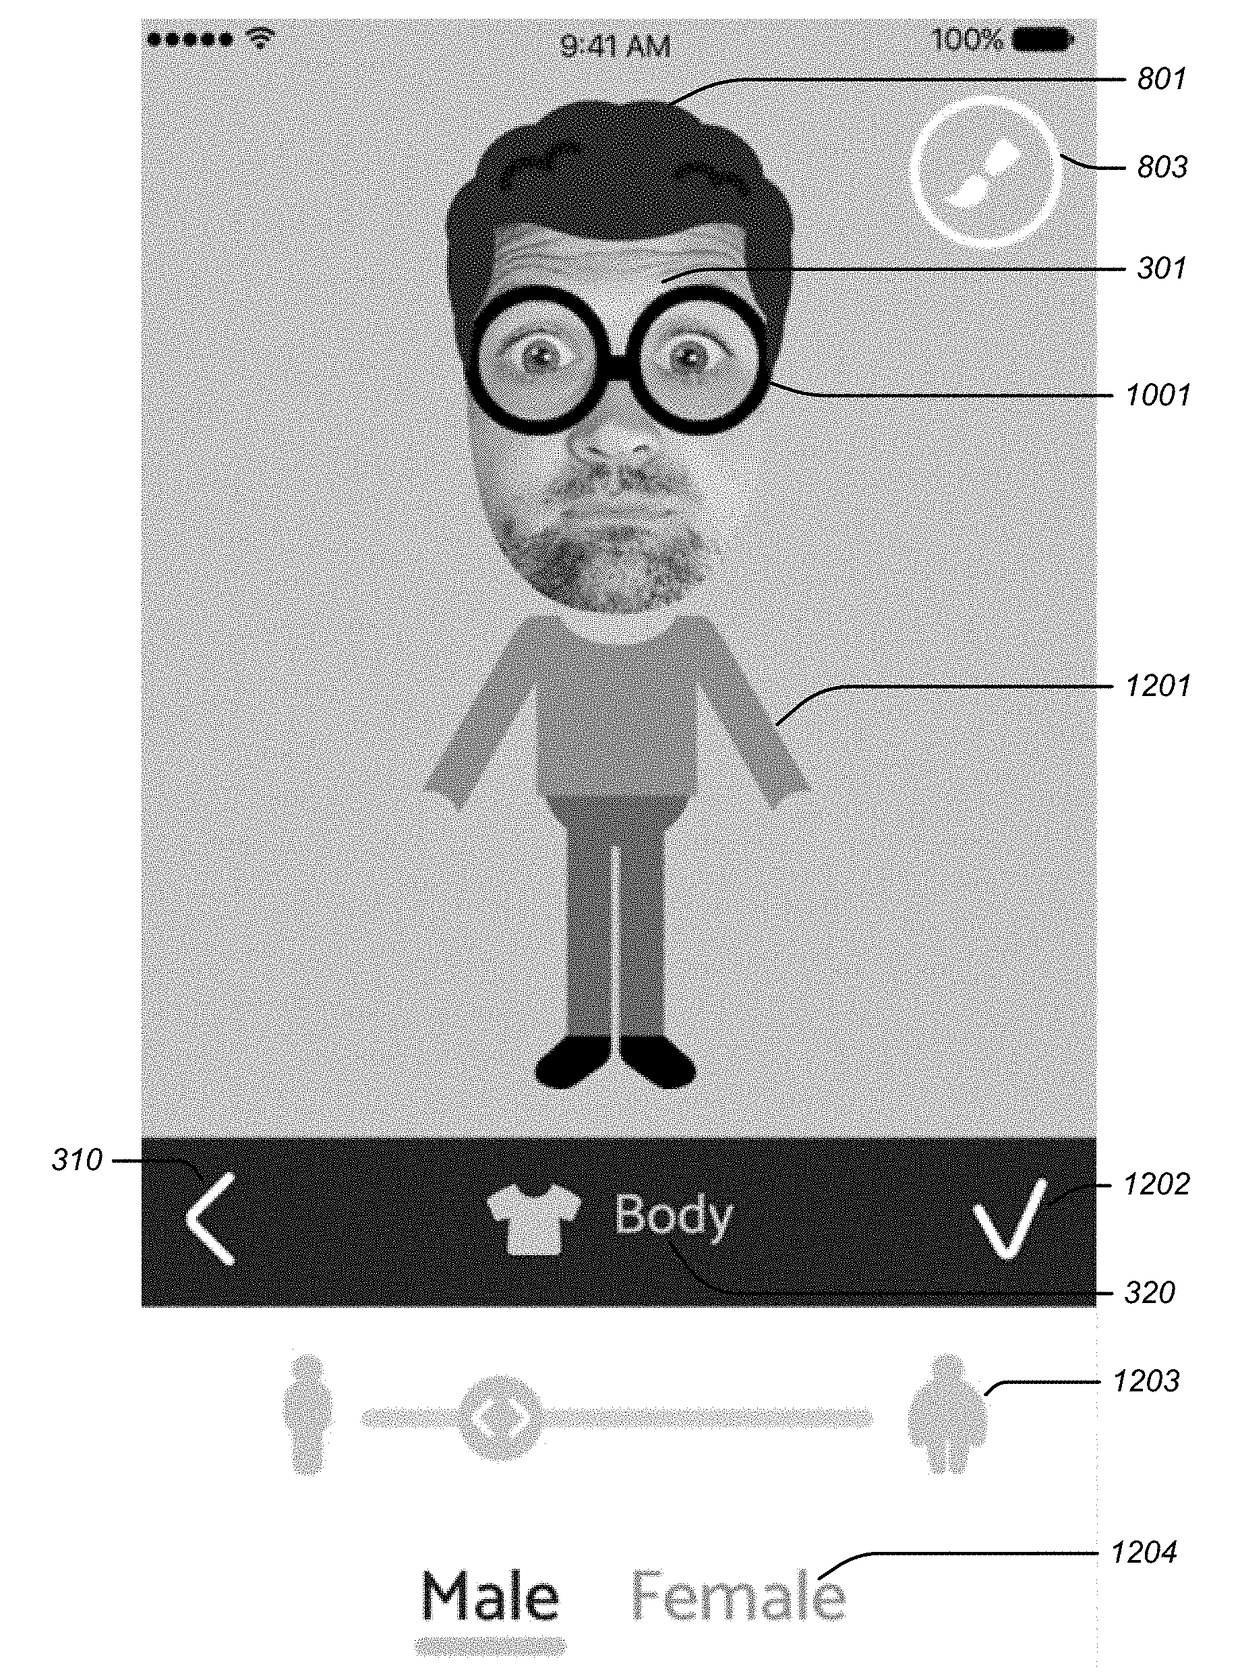 Combining user images and computer-generated illustrations to produce personalized animated digital avatars